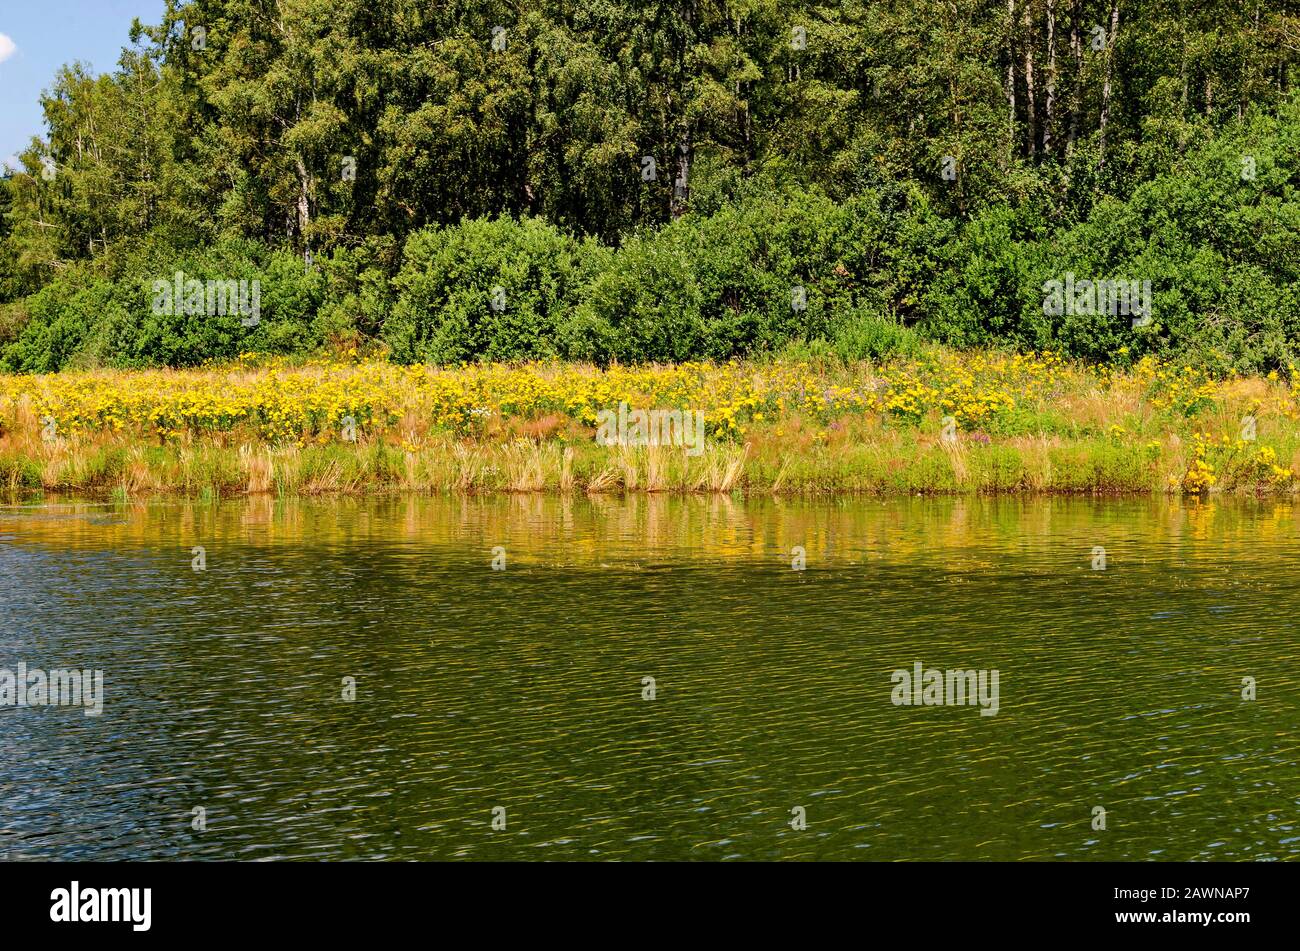 Beautiful fresh forest and glade with Yellow tansy Tanacetum vulgare flowers on the shore of artificial Vlasina mountain lake, South eastern Serbia Stock Photo